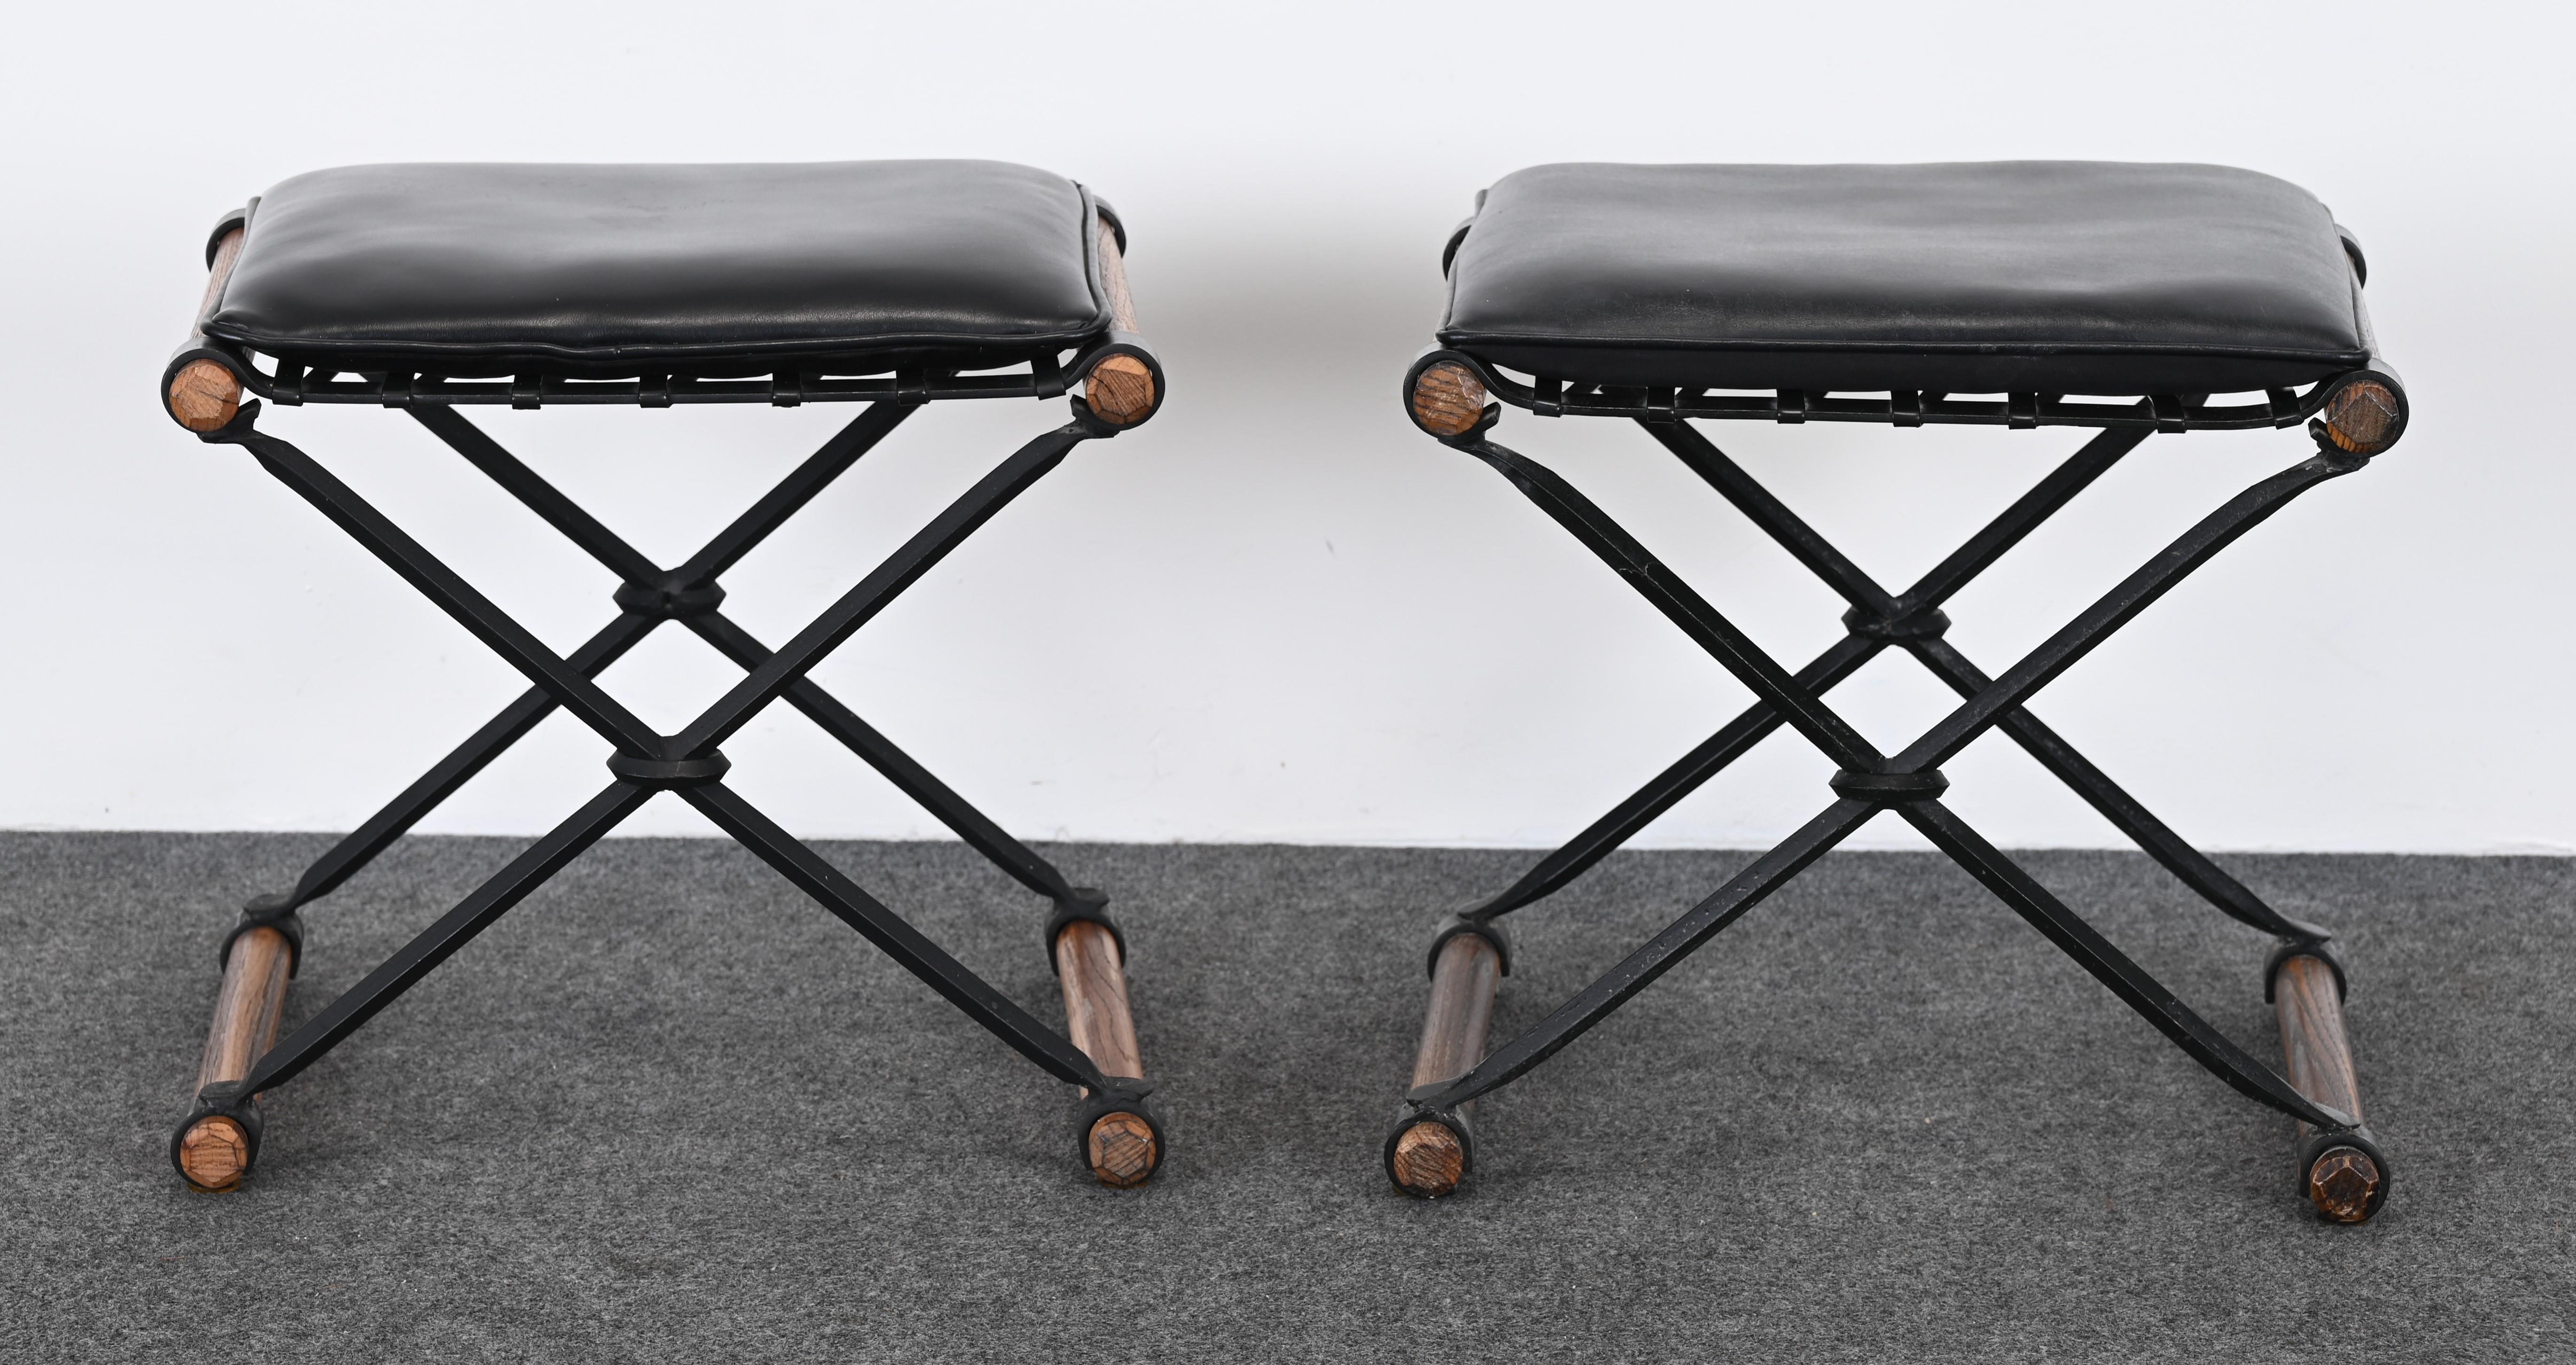 A Classical Pair of Cleo Baldon X-benches or stools for Terra Furniture Company. These iconic Mid-Century Benches would look great in any modern interior. These came out of an estate and have the original vinyl fabric in black. Beautiful oak accents